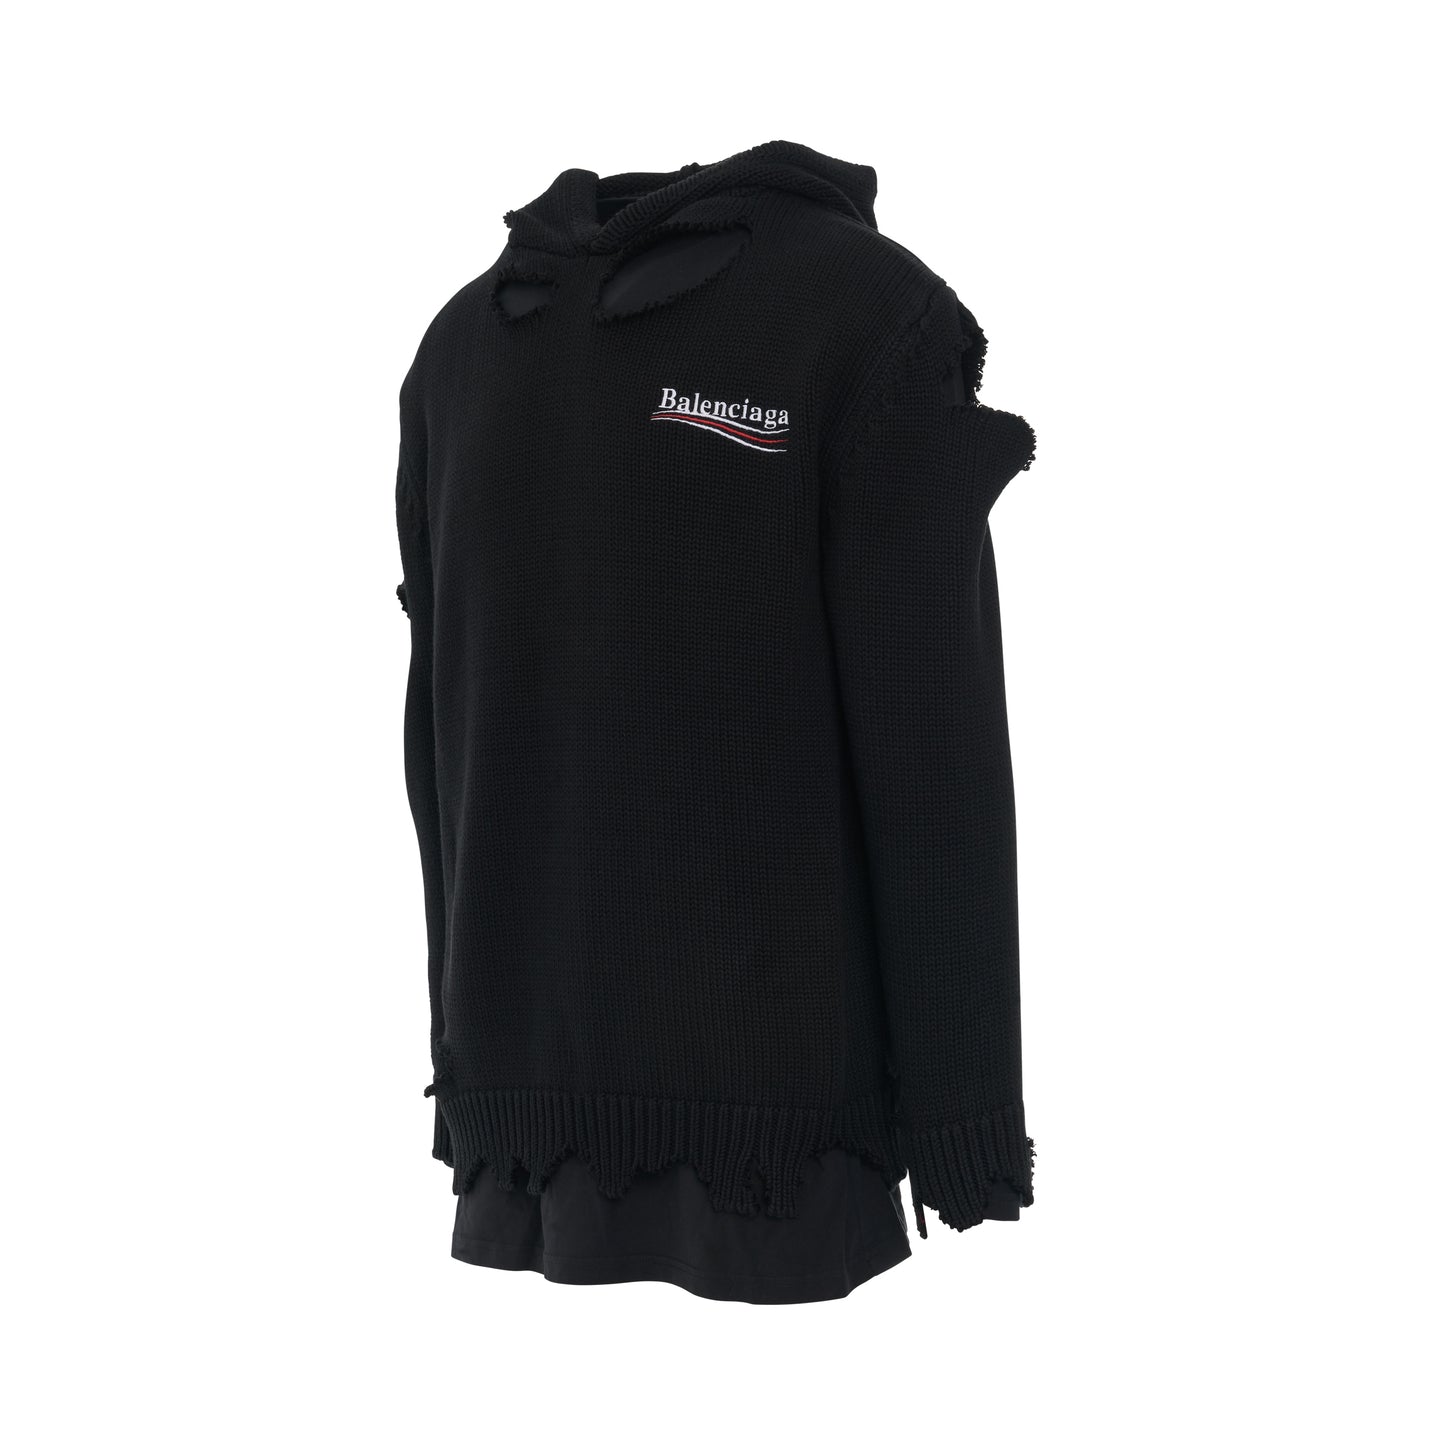 Destroyed Political Campaign Hooded Knitwear in Black